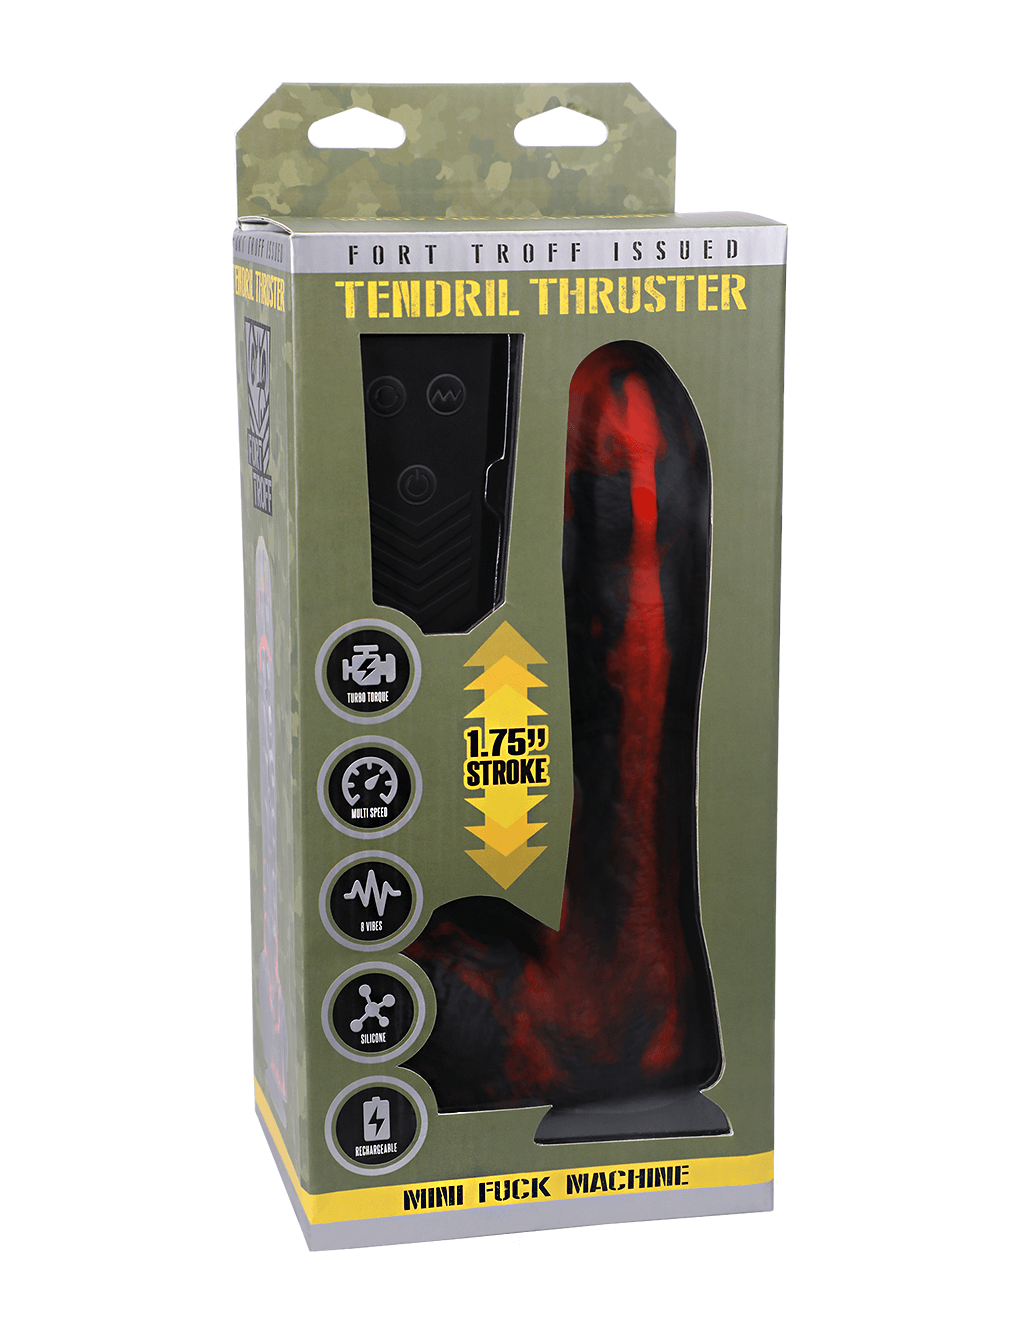 Fort Troff Tendril Thruster - Red/Black - Box Front